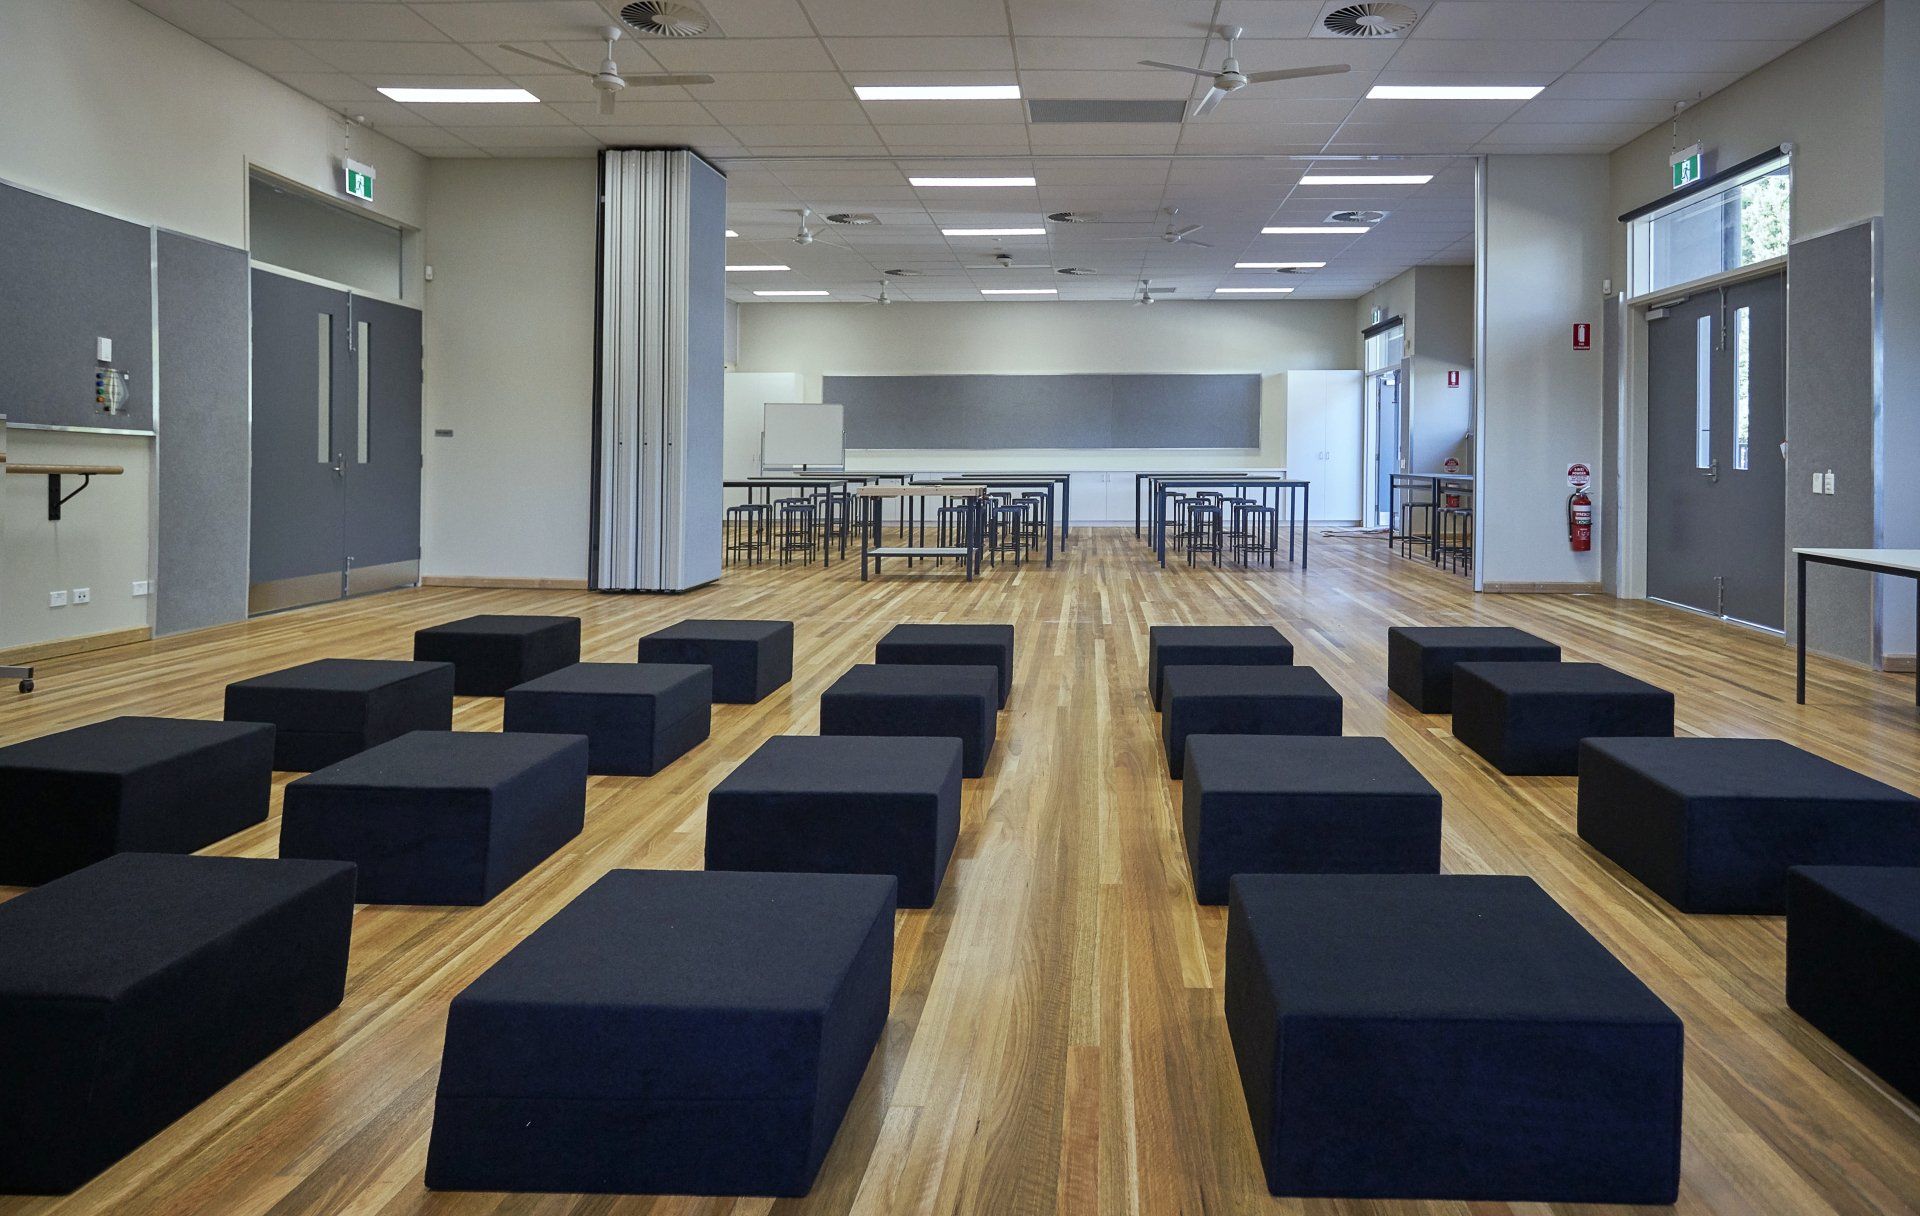 We Install High-Quality, Space-Saving Folding Walls in Sydney